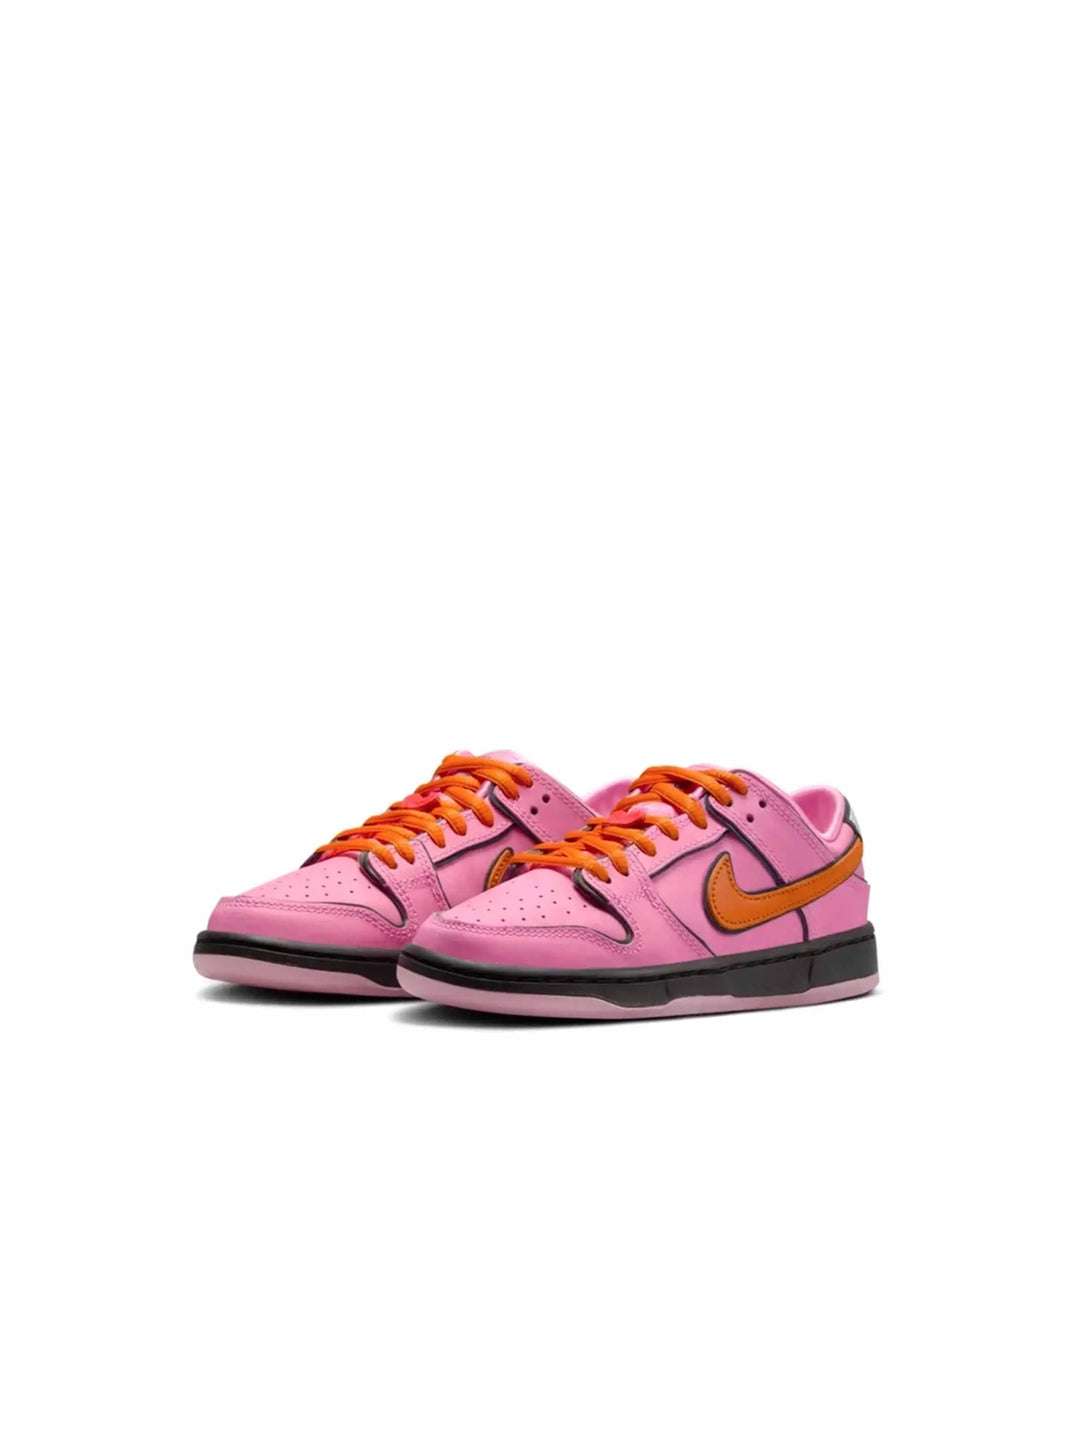 Nike SB Dunk Low The Powerpuff Girls Blossom (PS) in Auckland, New Zealand - Shop name